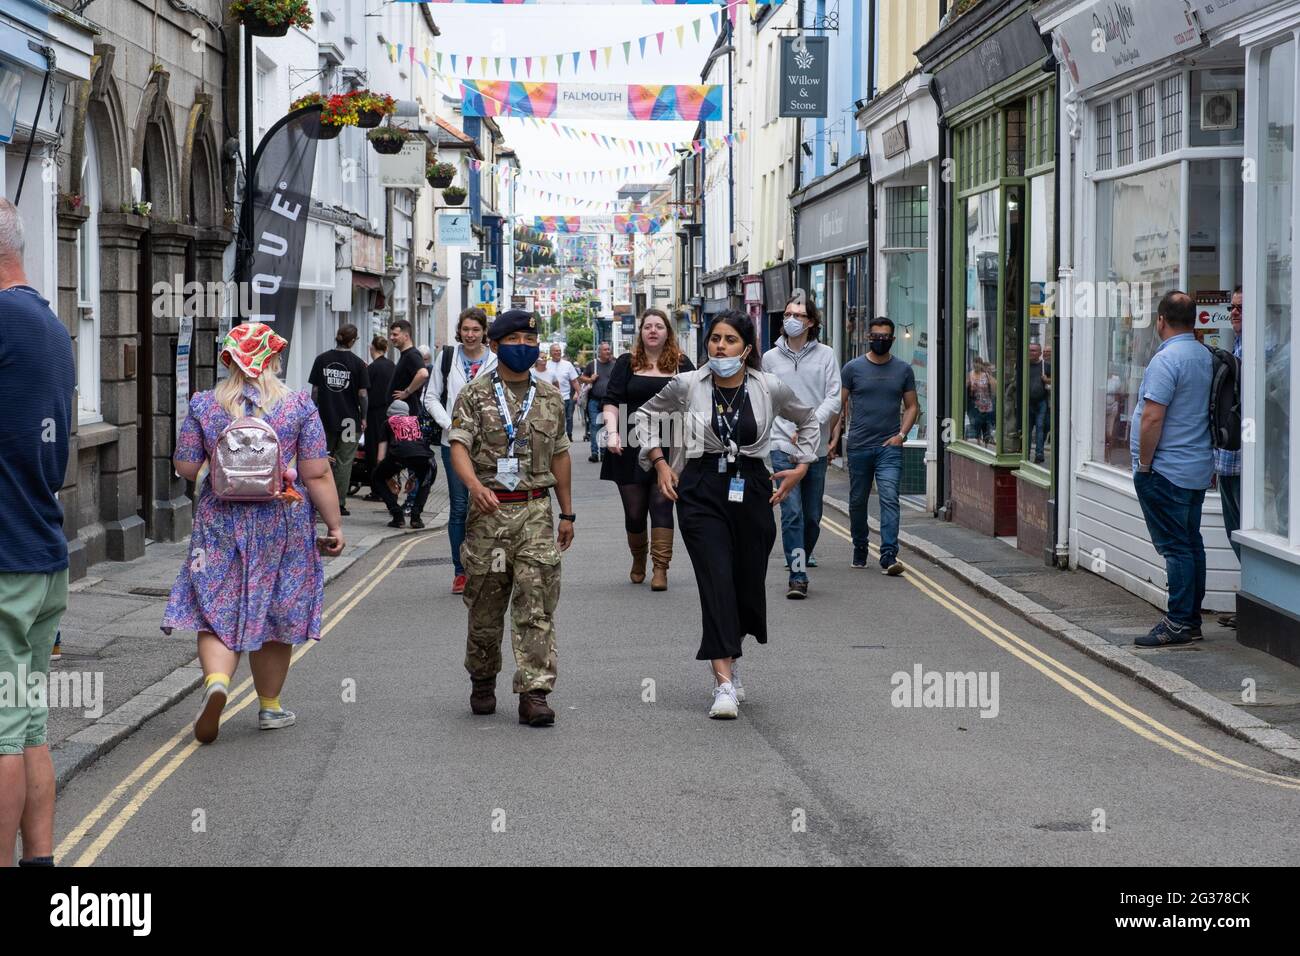 Uniformed Gurkha soldier walking up Falmouth's Main Street as part of the team involved with the G7 summit on Climate Change. Other people around. Stock Photo